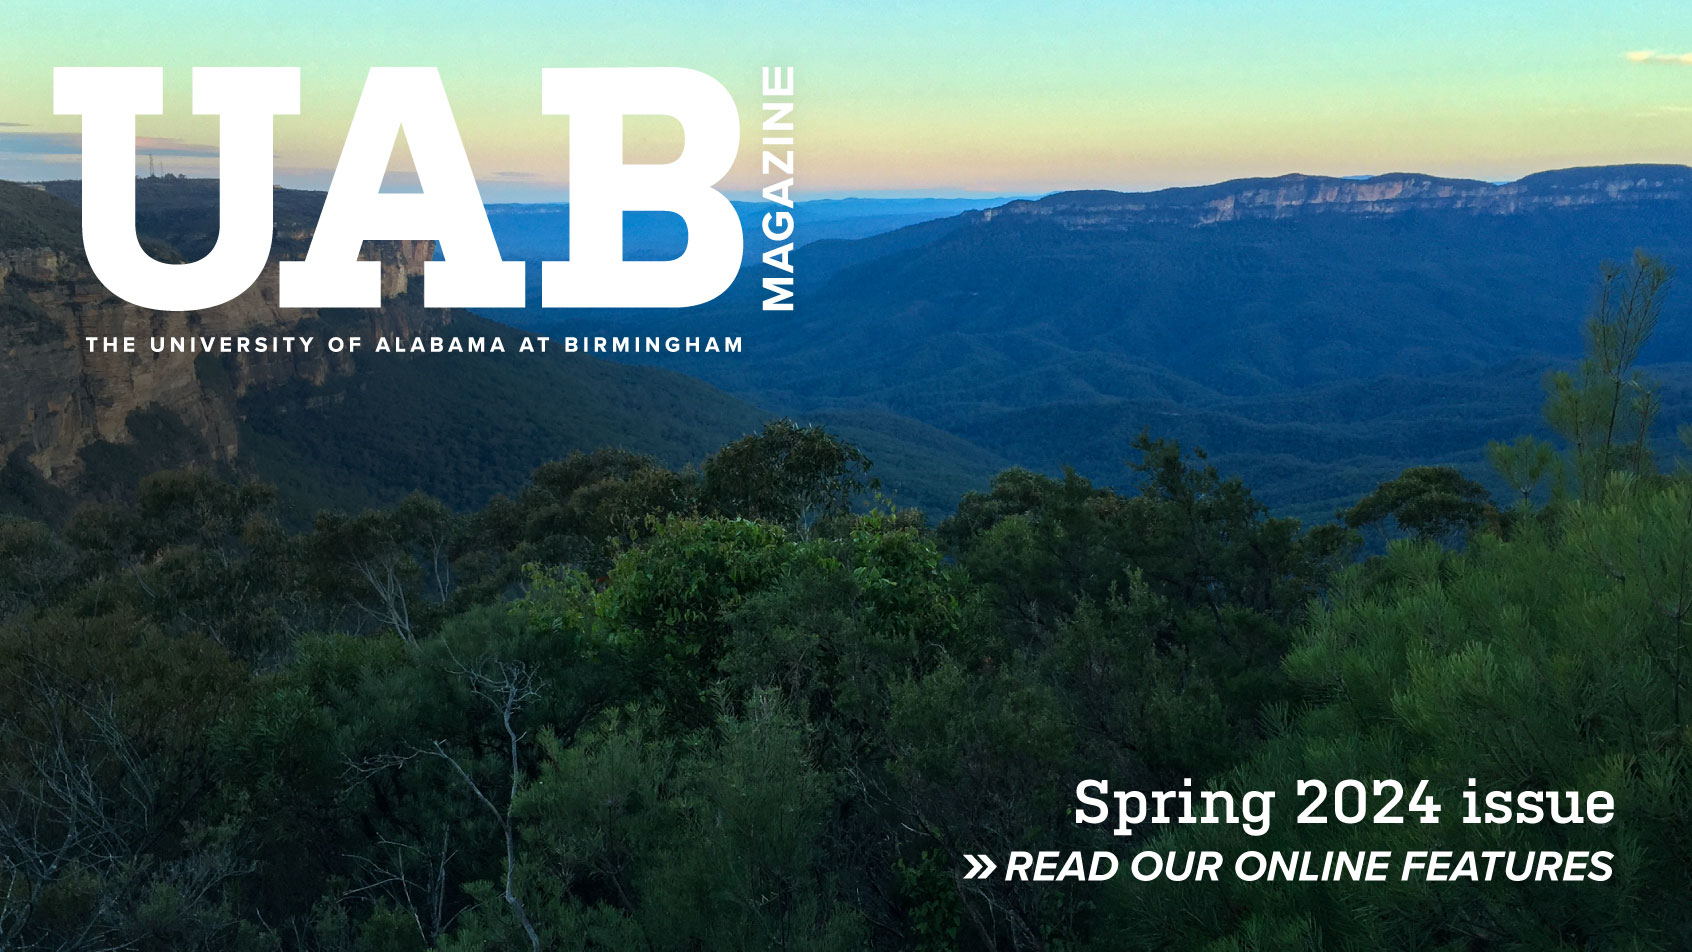 UAB Magazine: Spring 2024 issue. Read our online features.